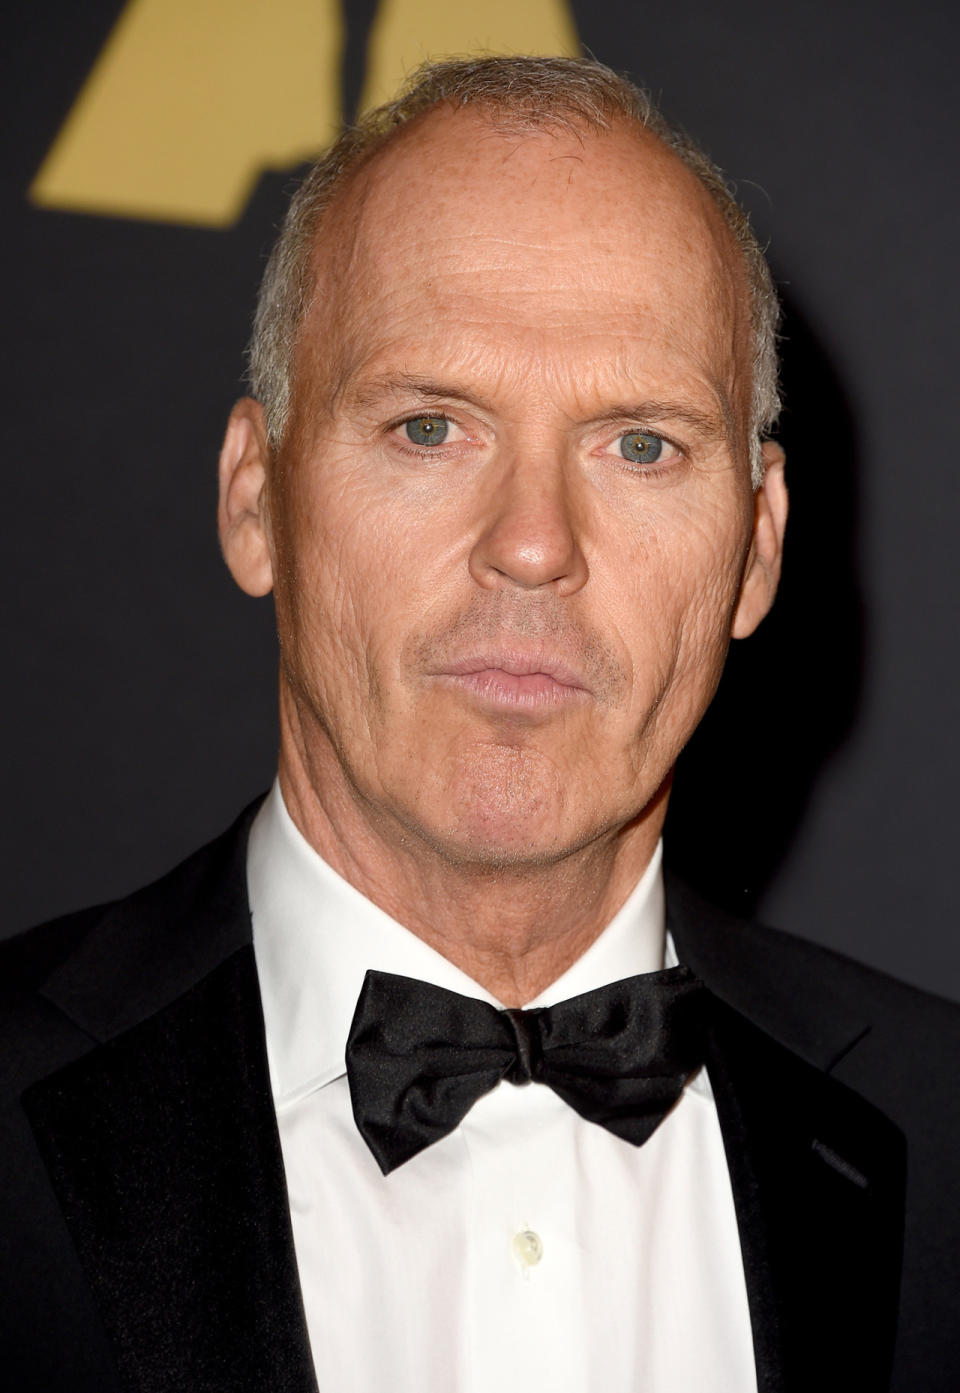 HOLLYWOOD, CA - NOVEMBER 08: Actor Michael Keaton attends the Academy Of Motion Picture Arts And Sciences’ 2014 Governors Awards at The Ray Dolby Ballroom at Hollywood & Highland Center on November 8, 2014 in Hollywood, California. (